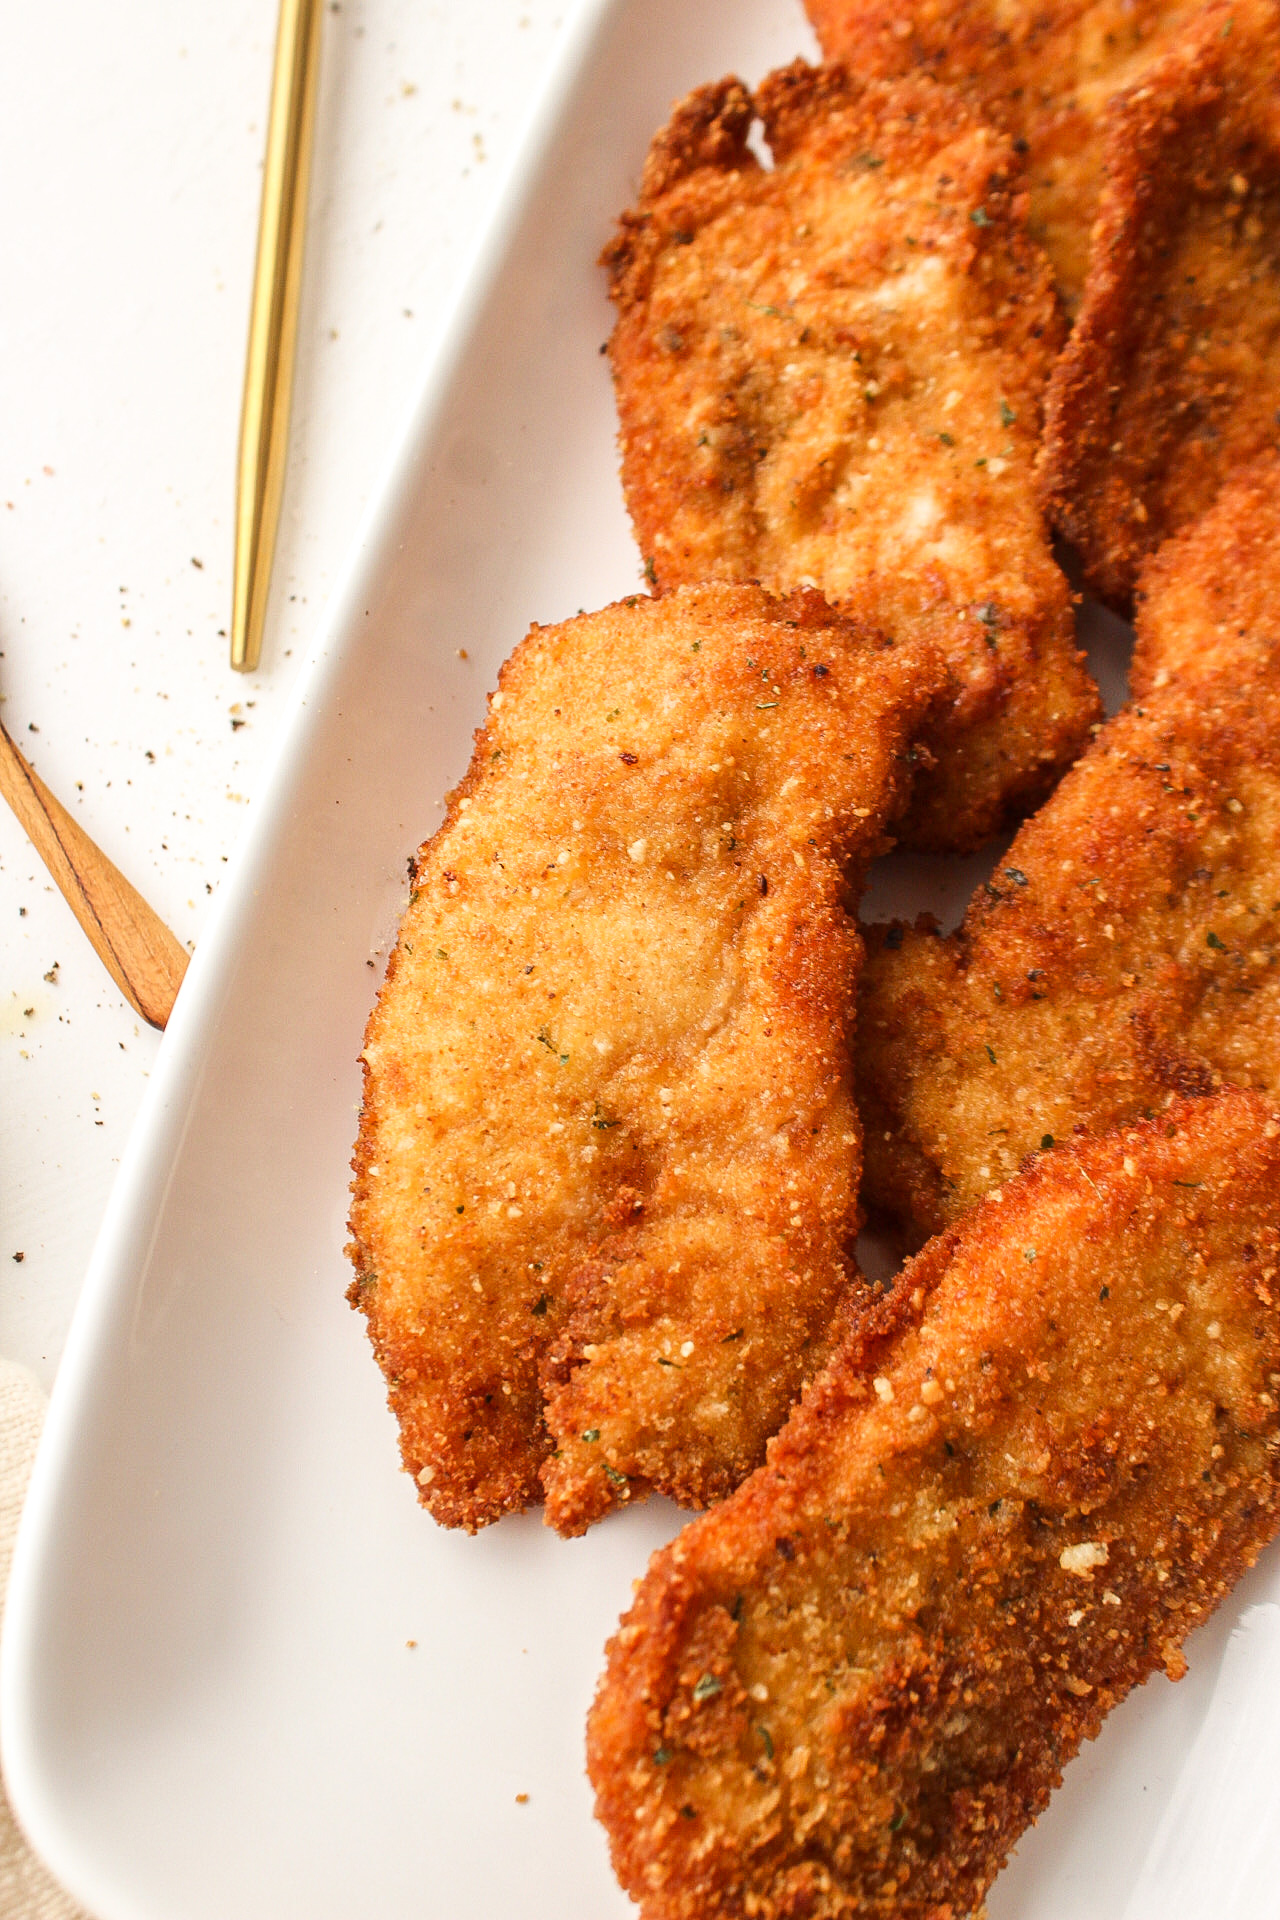 a close up of a breaded and fried chicken cutlet